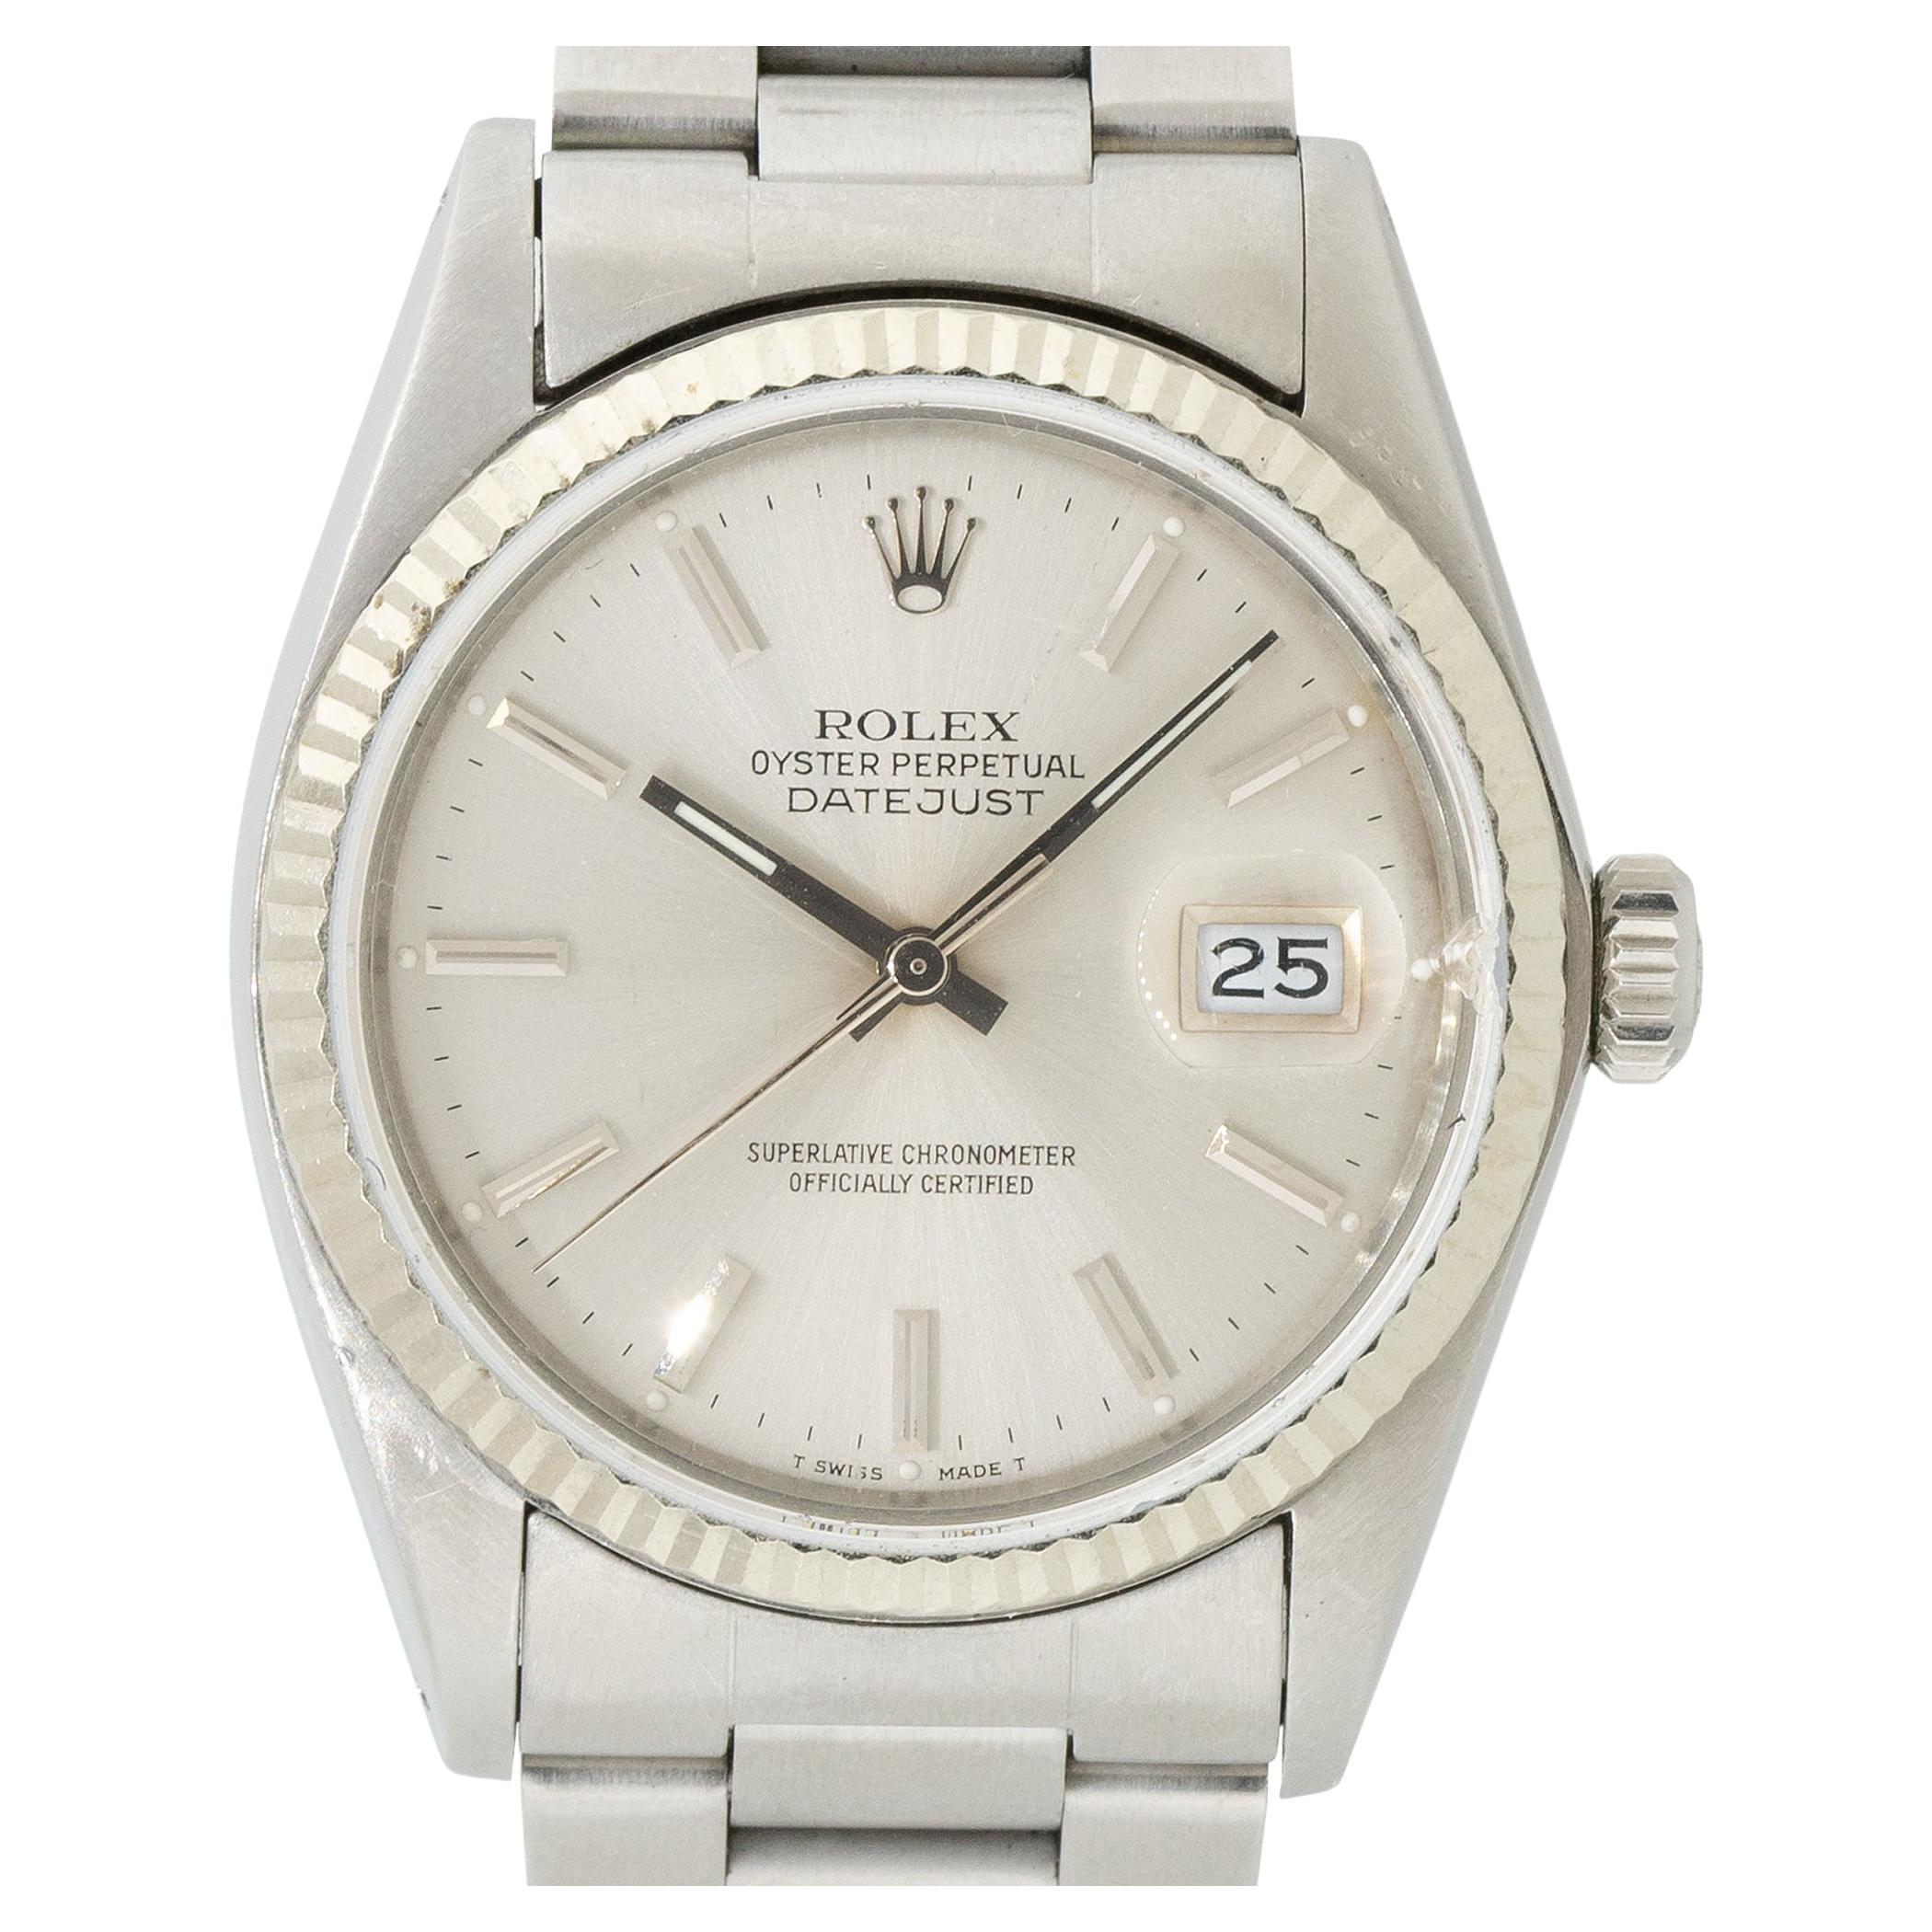 Rolex 16030 Datejust Stainless Steel 36mm Silver Dial Watch For Sale